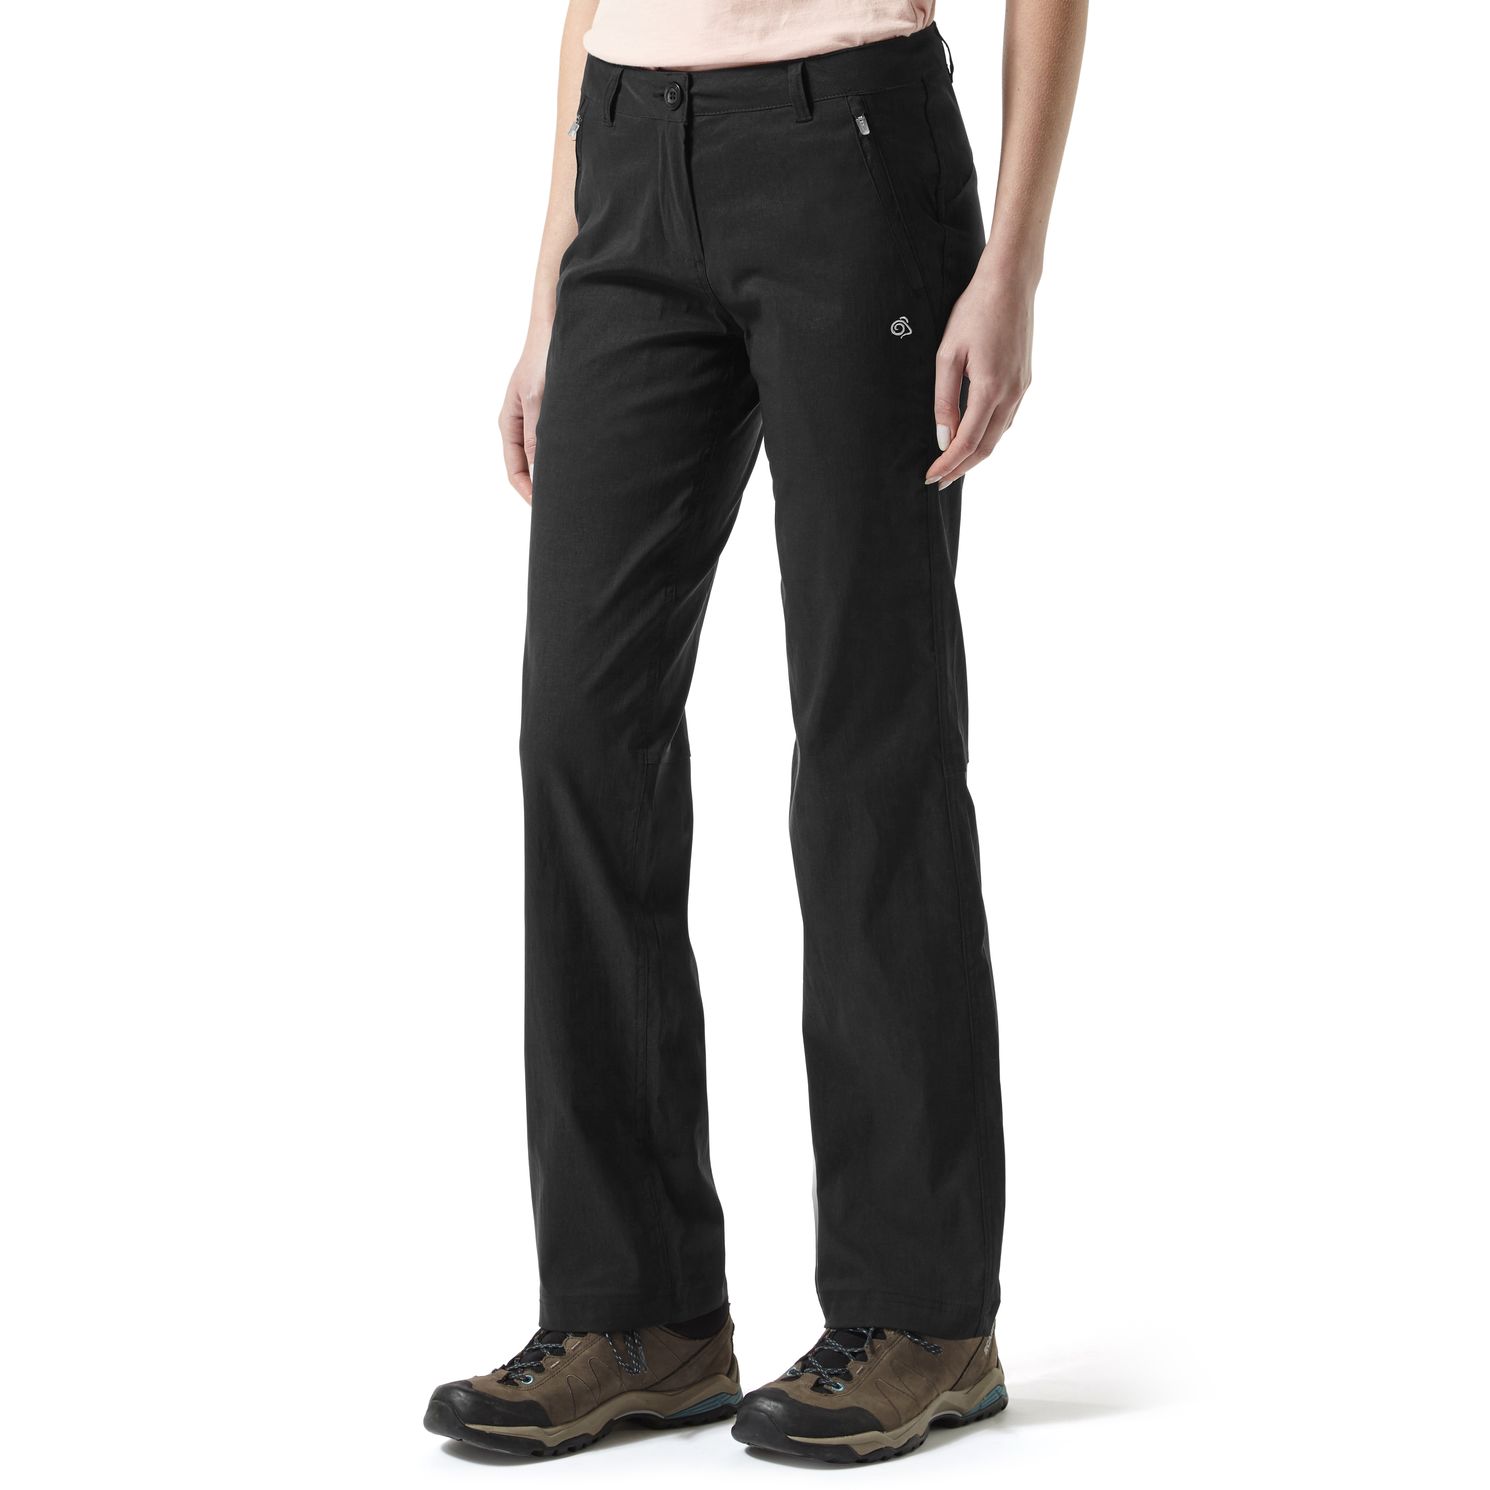 Craghoppers Craghoppers Womens Kiwi Pro Trousers 